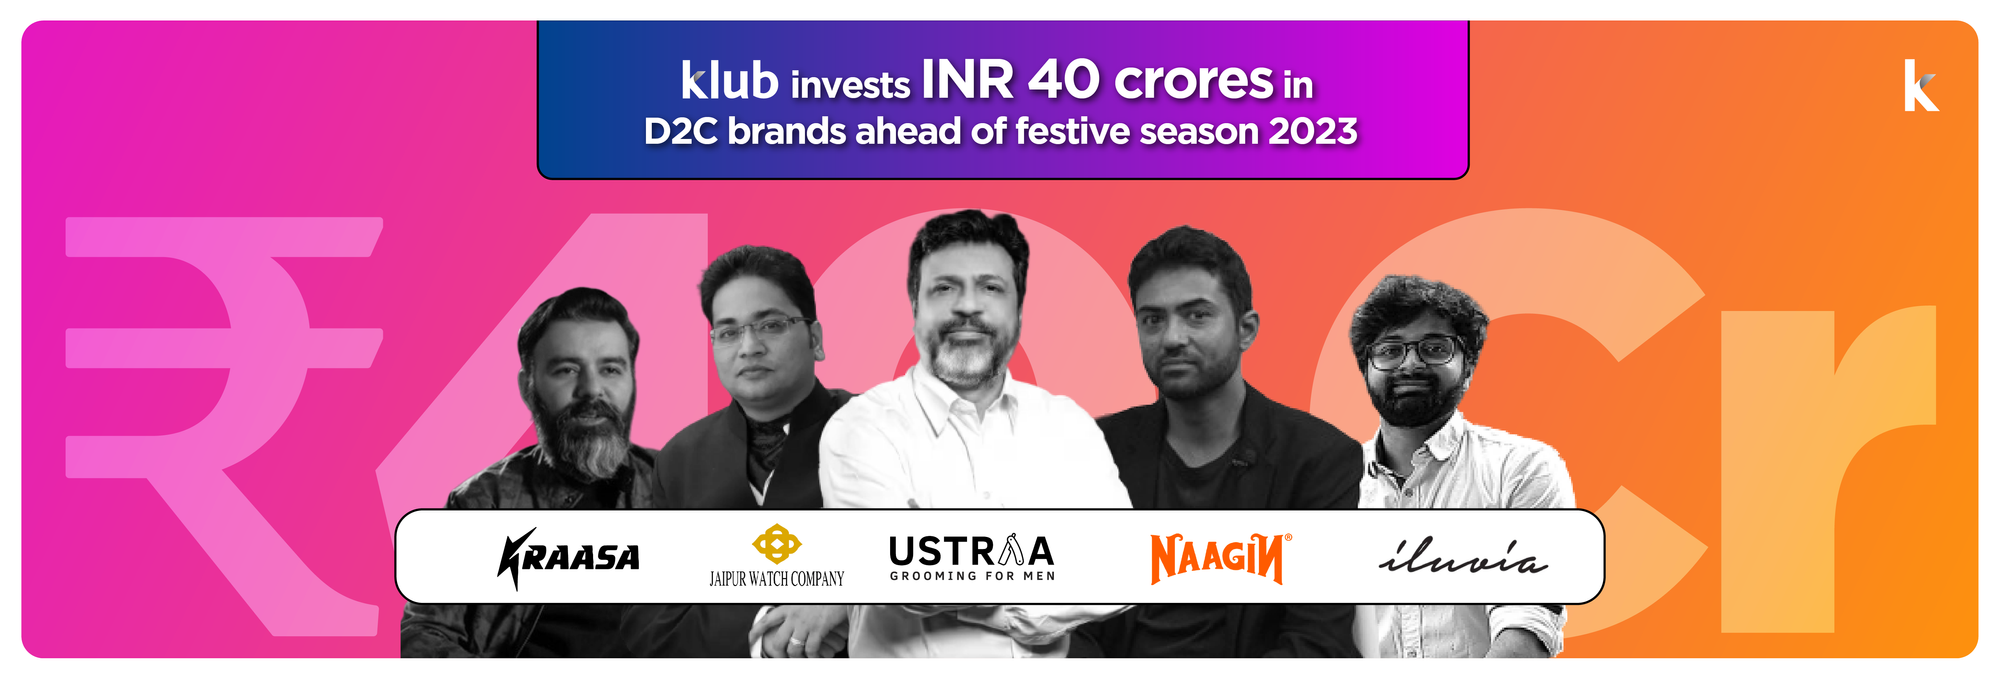 Klub bolsters Indian brands with INR 40 crores investment, primed for festive season success